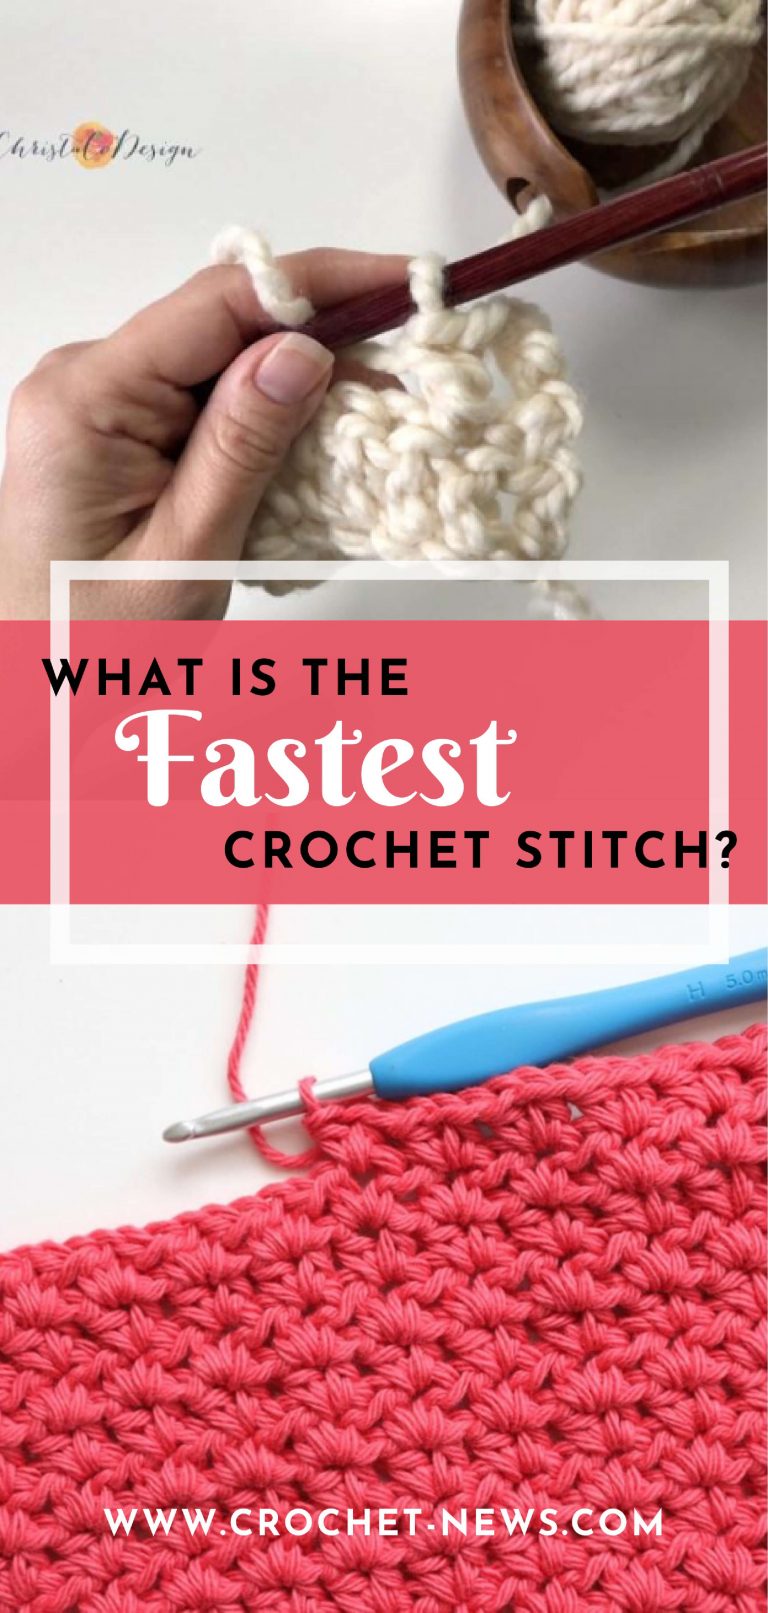 What Is The Fastest Crochet Stitch? - Crochet News